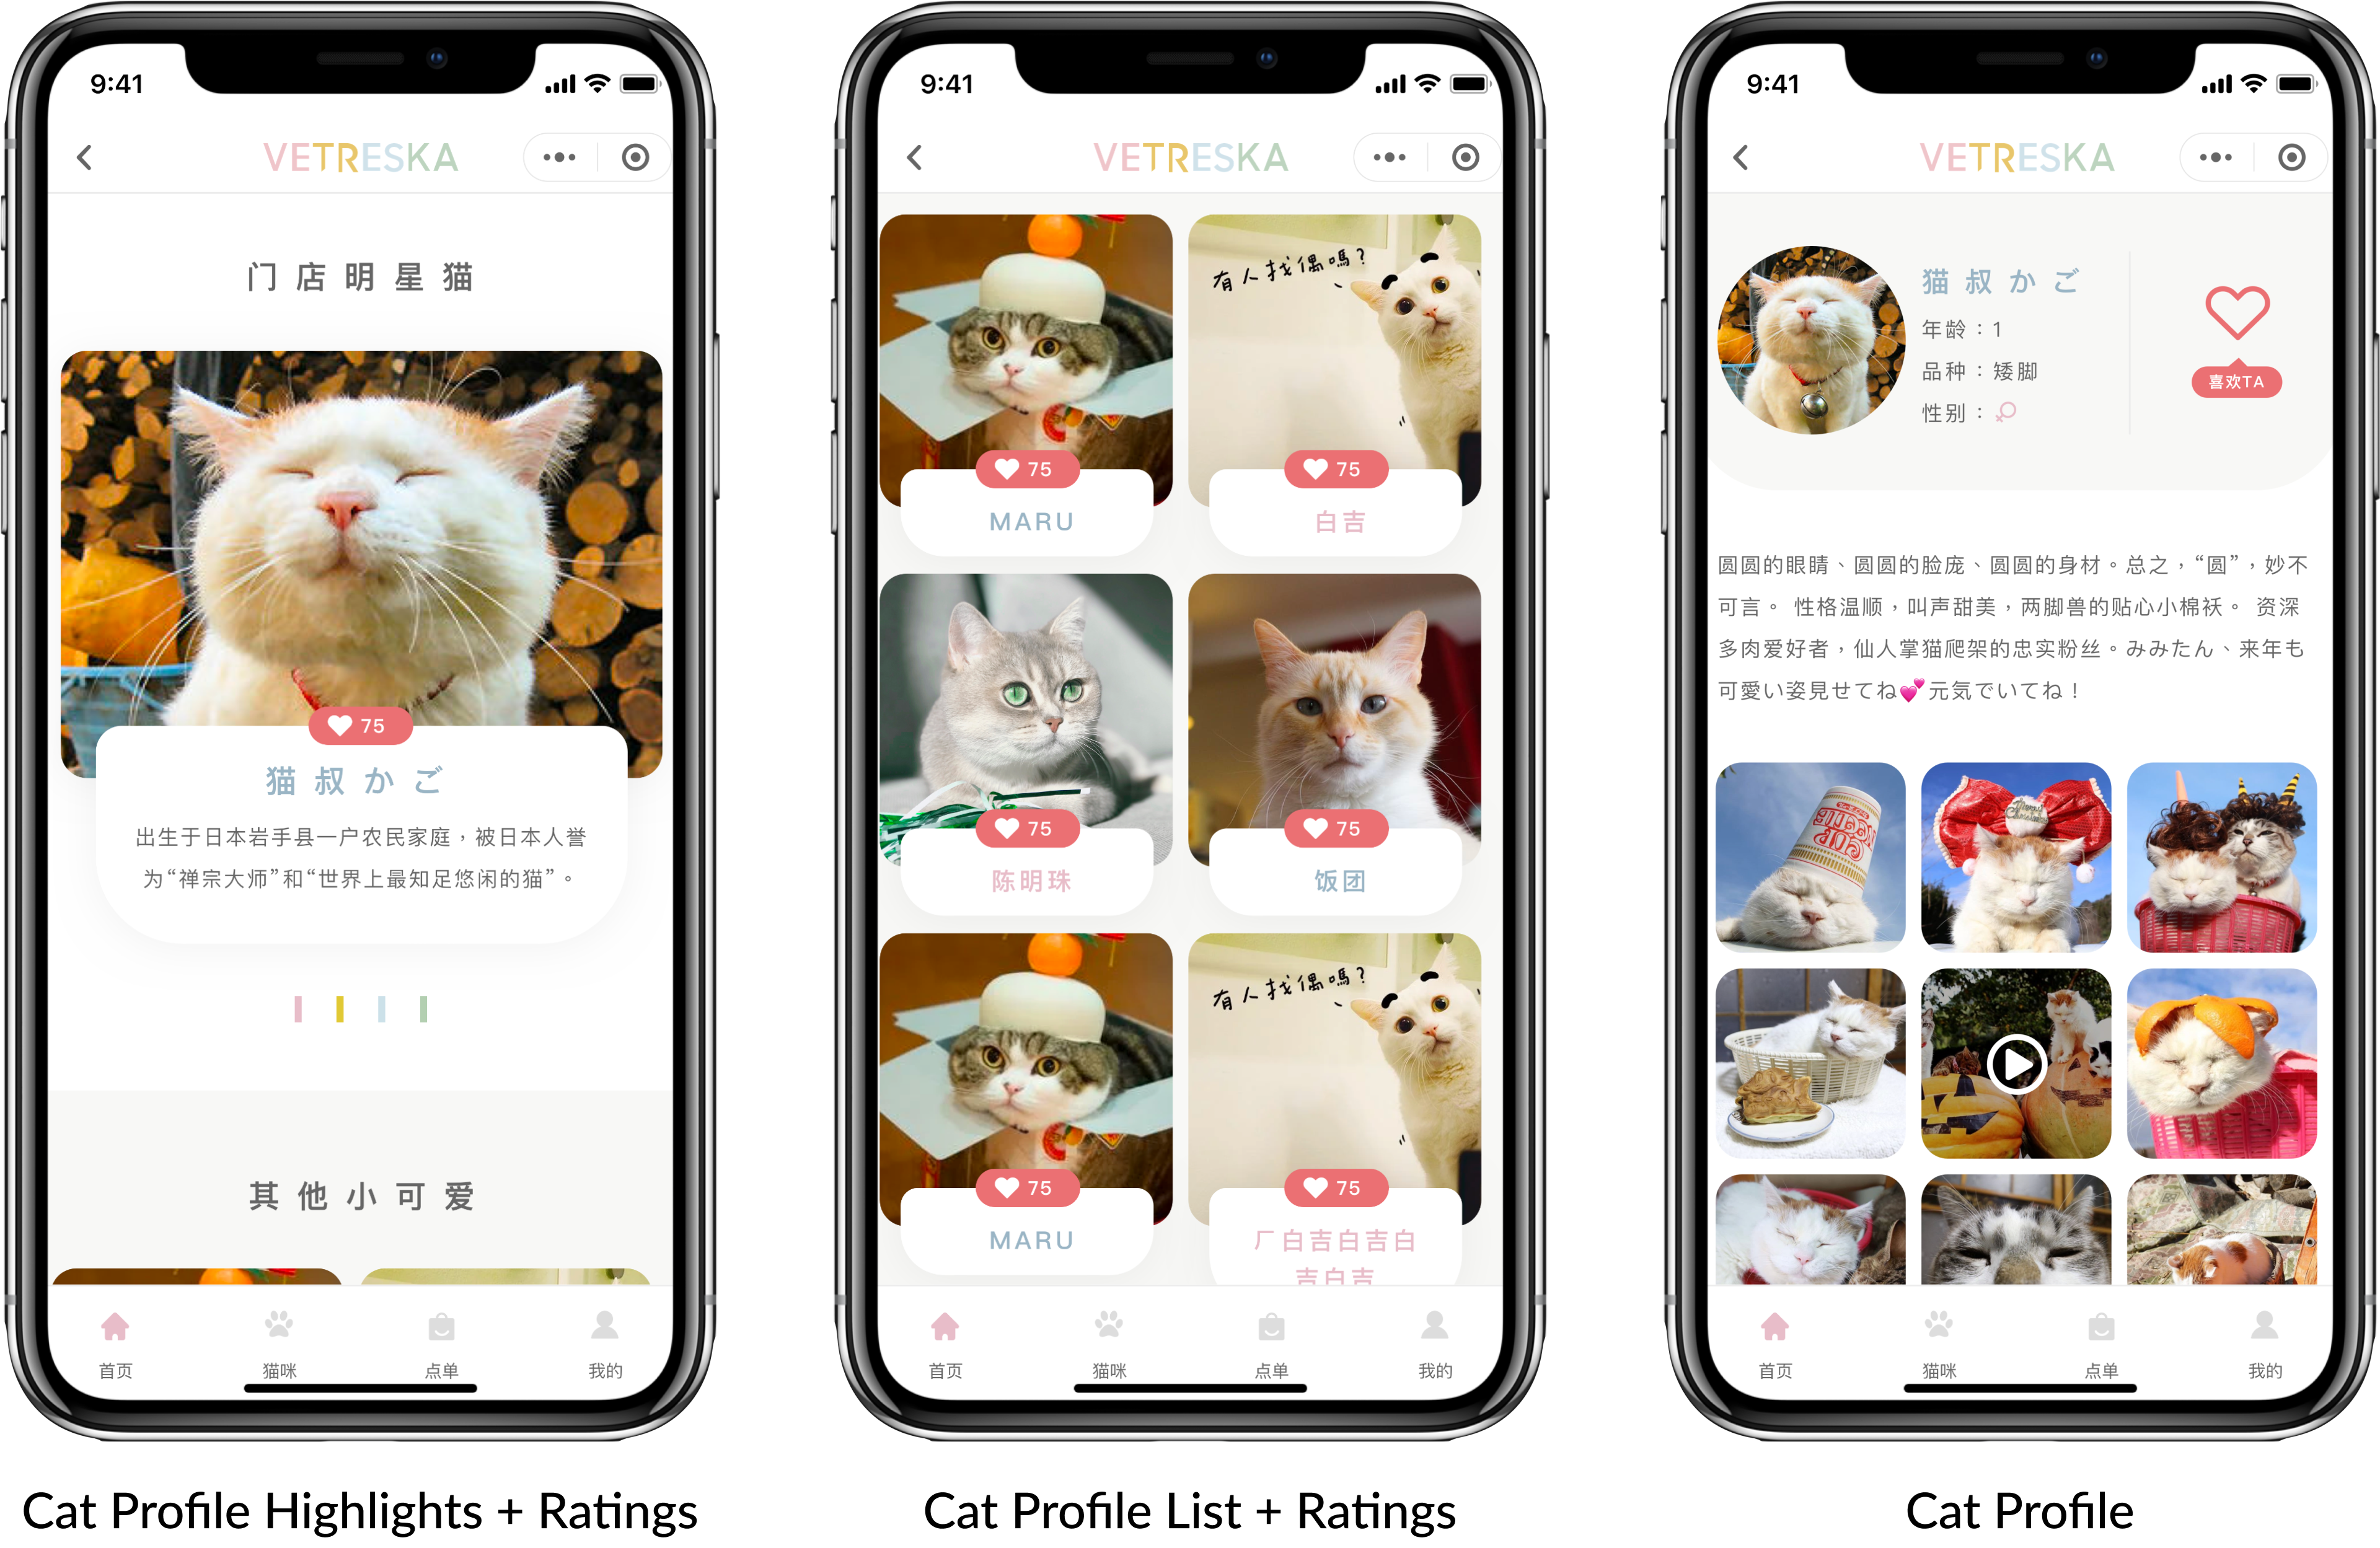 Users can also check the profiles of the cats at the Vetreska Cat Cafe and vote for their favorites on the Mini Program